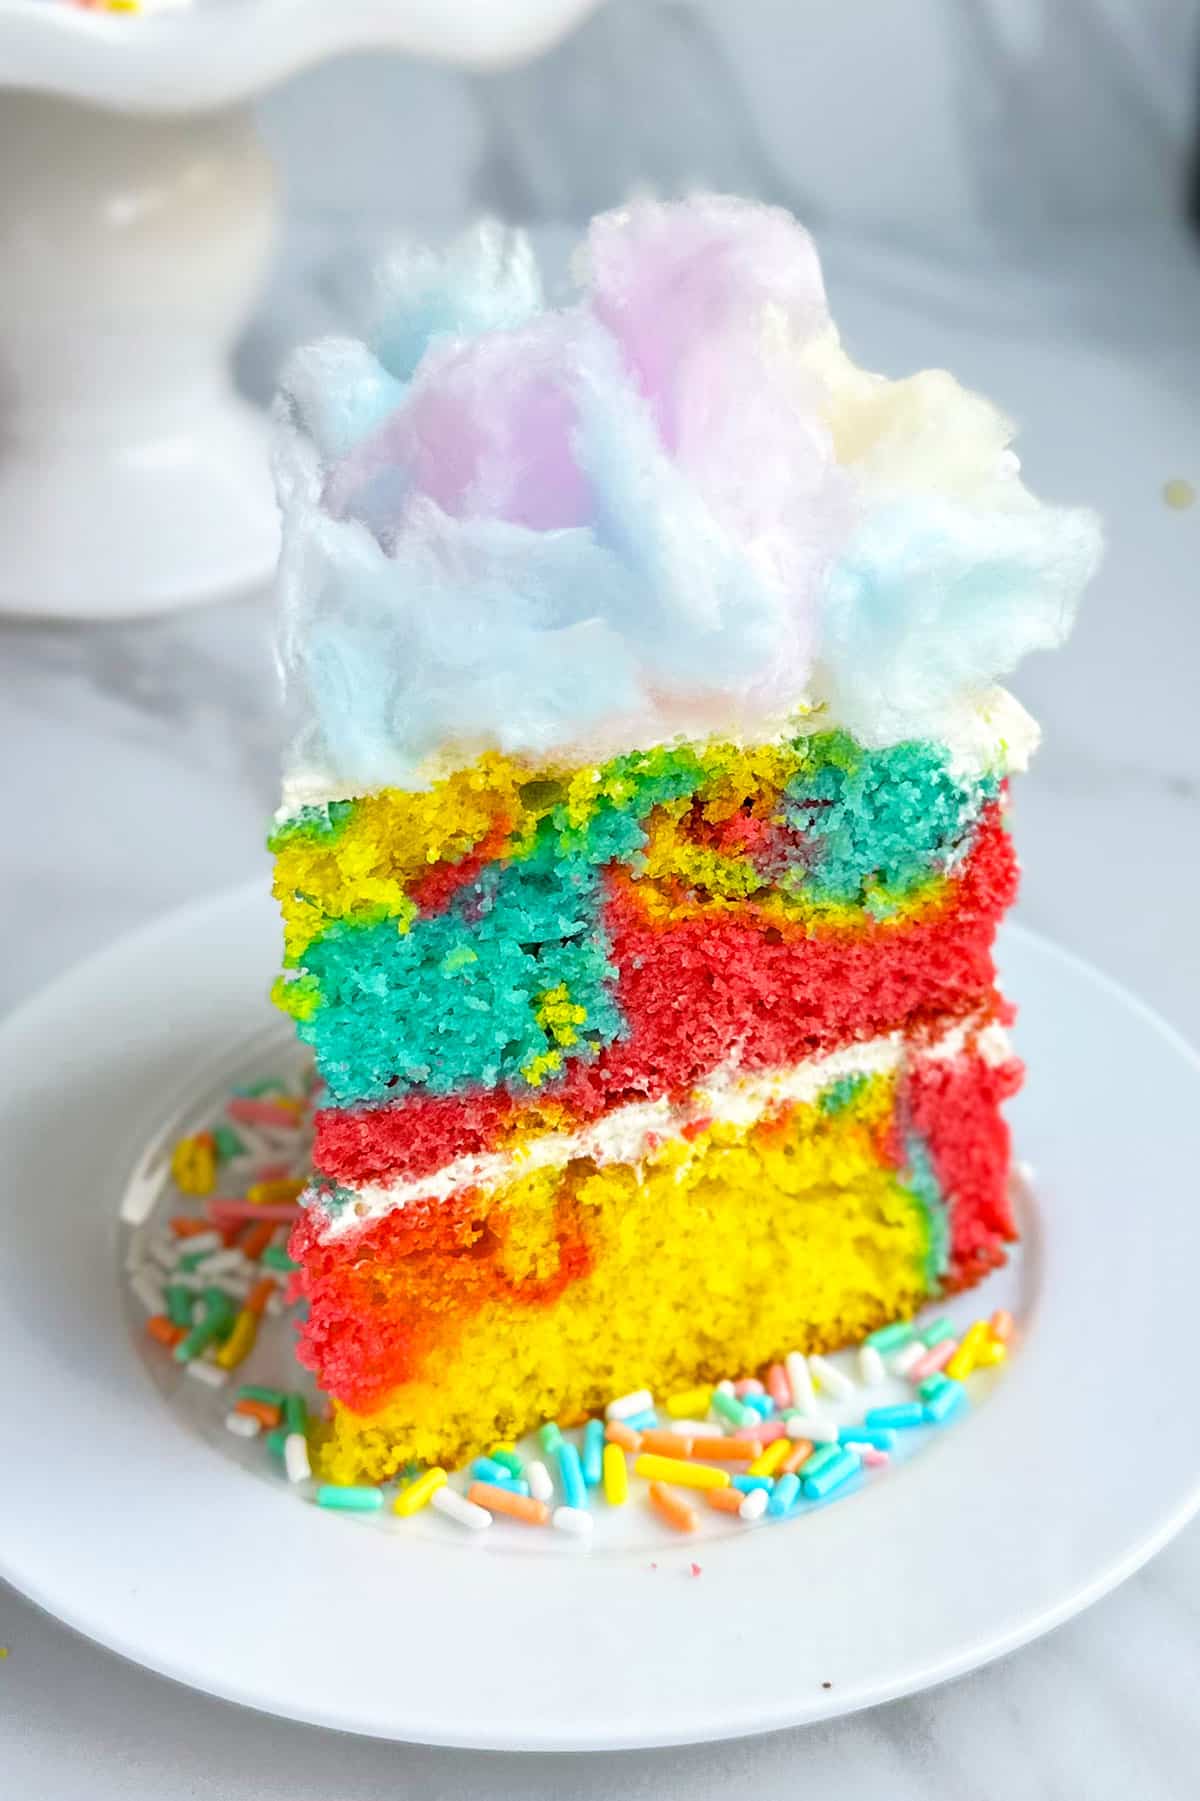 Slice of Colorful Layer Cake on White Dish. 